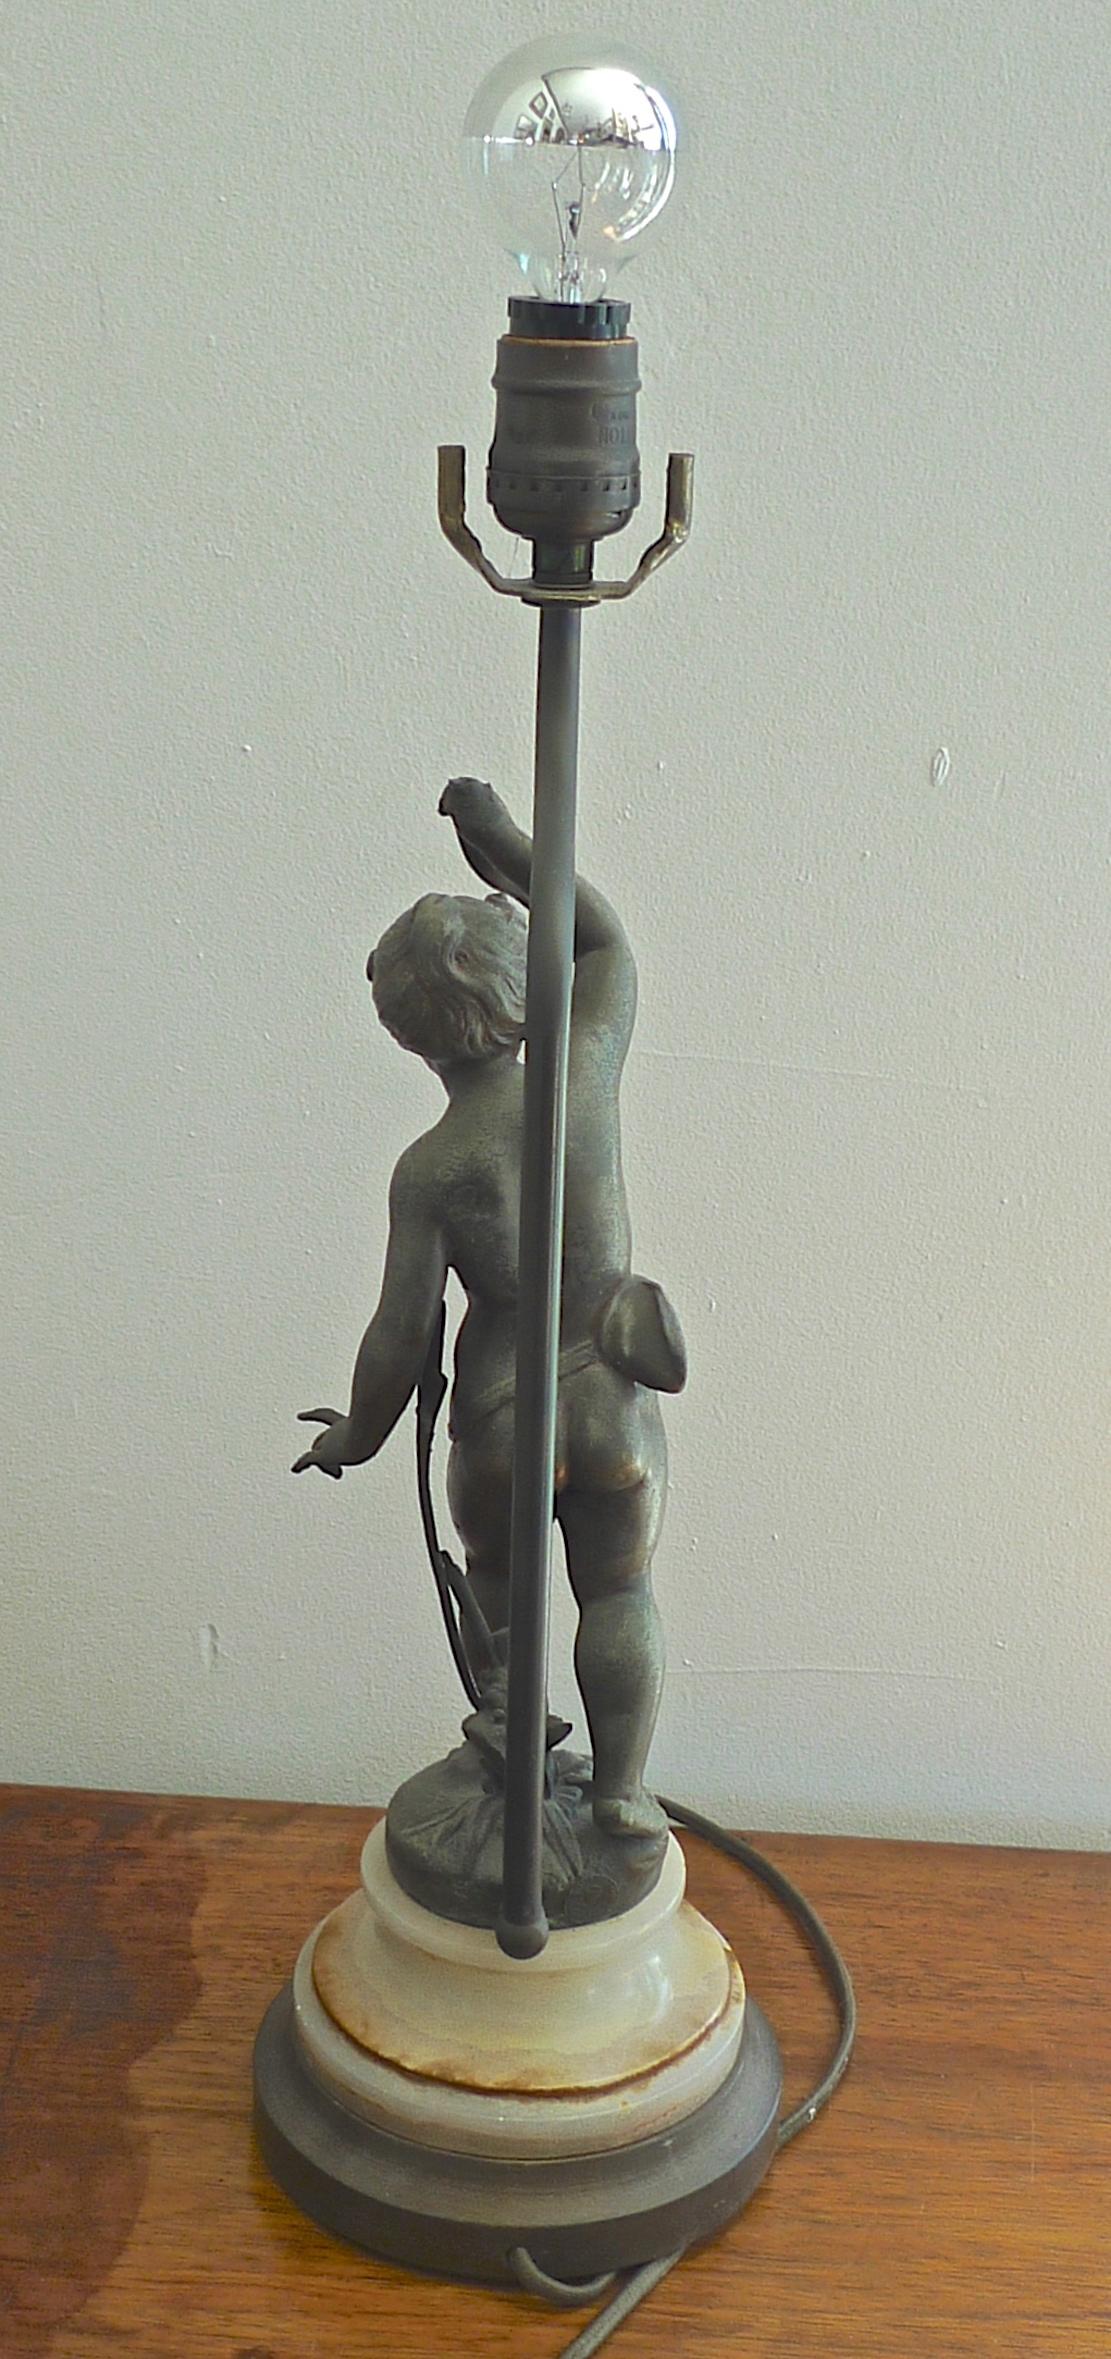 French 19th Century Bronze Statuette on Marble Stand Converted to Desk Lamp In Distressed Condition For Sale In Santa Monica, CA